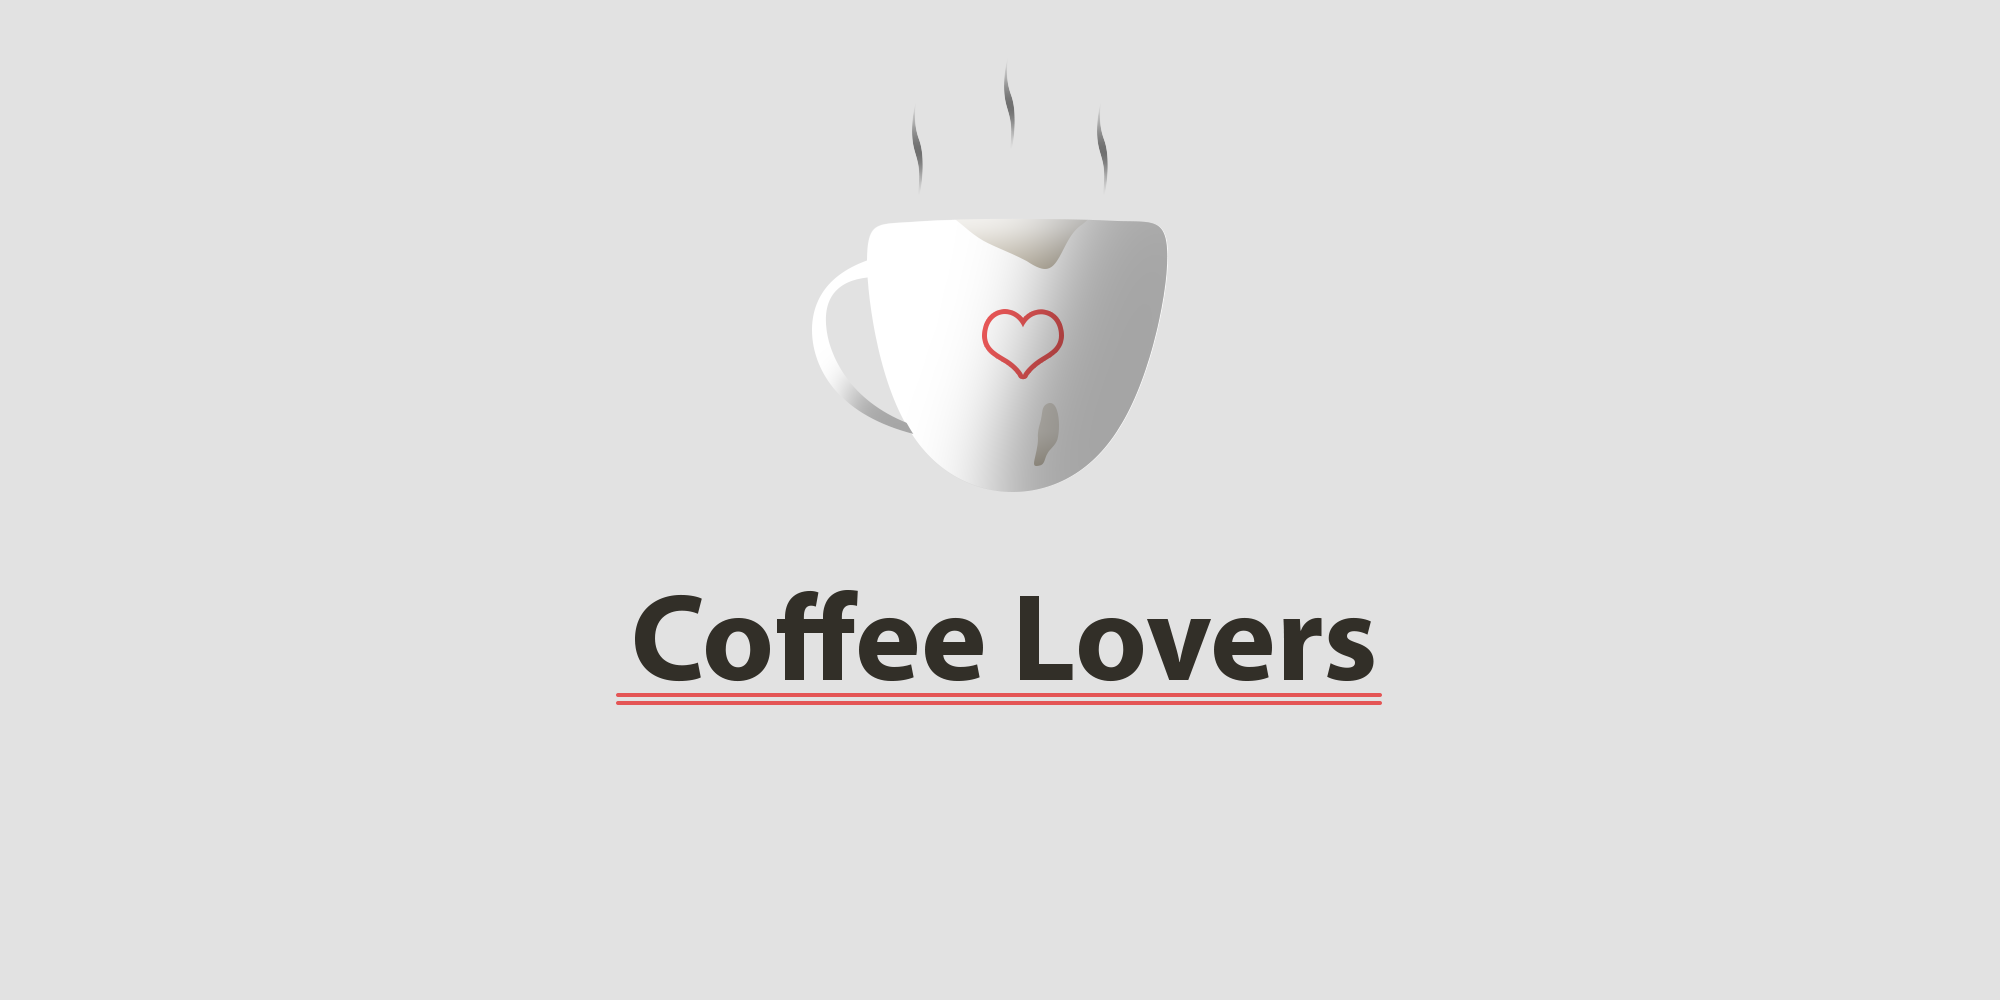 COFFEELOVERS.png?raw=true